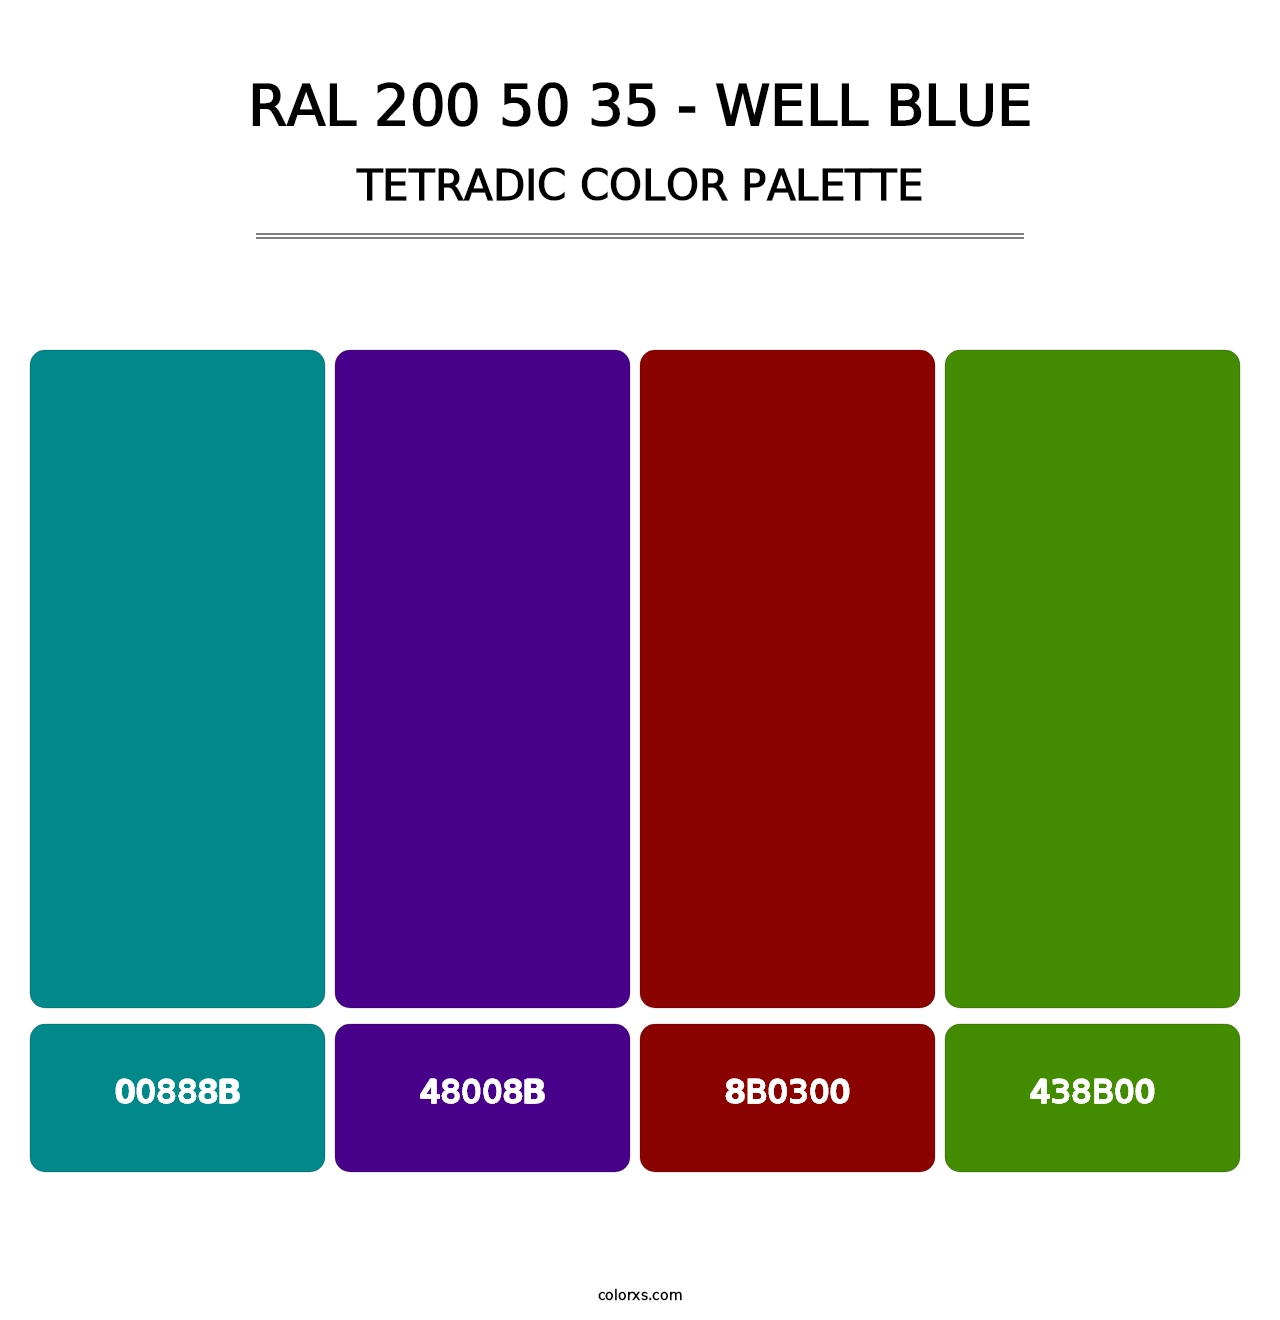 RAL 200 50 35 - Well Blue - Tetradic Color Palette